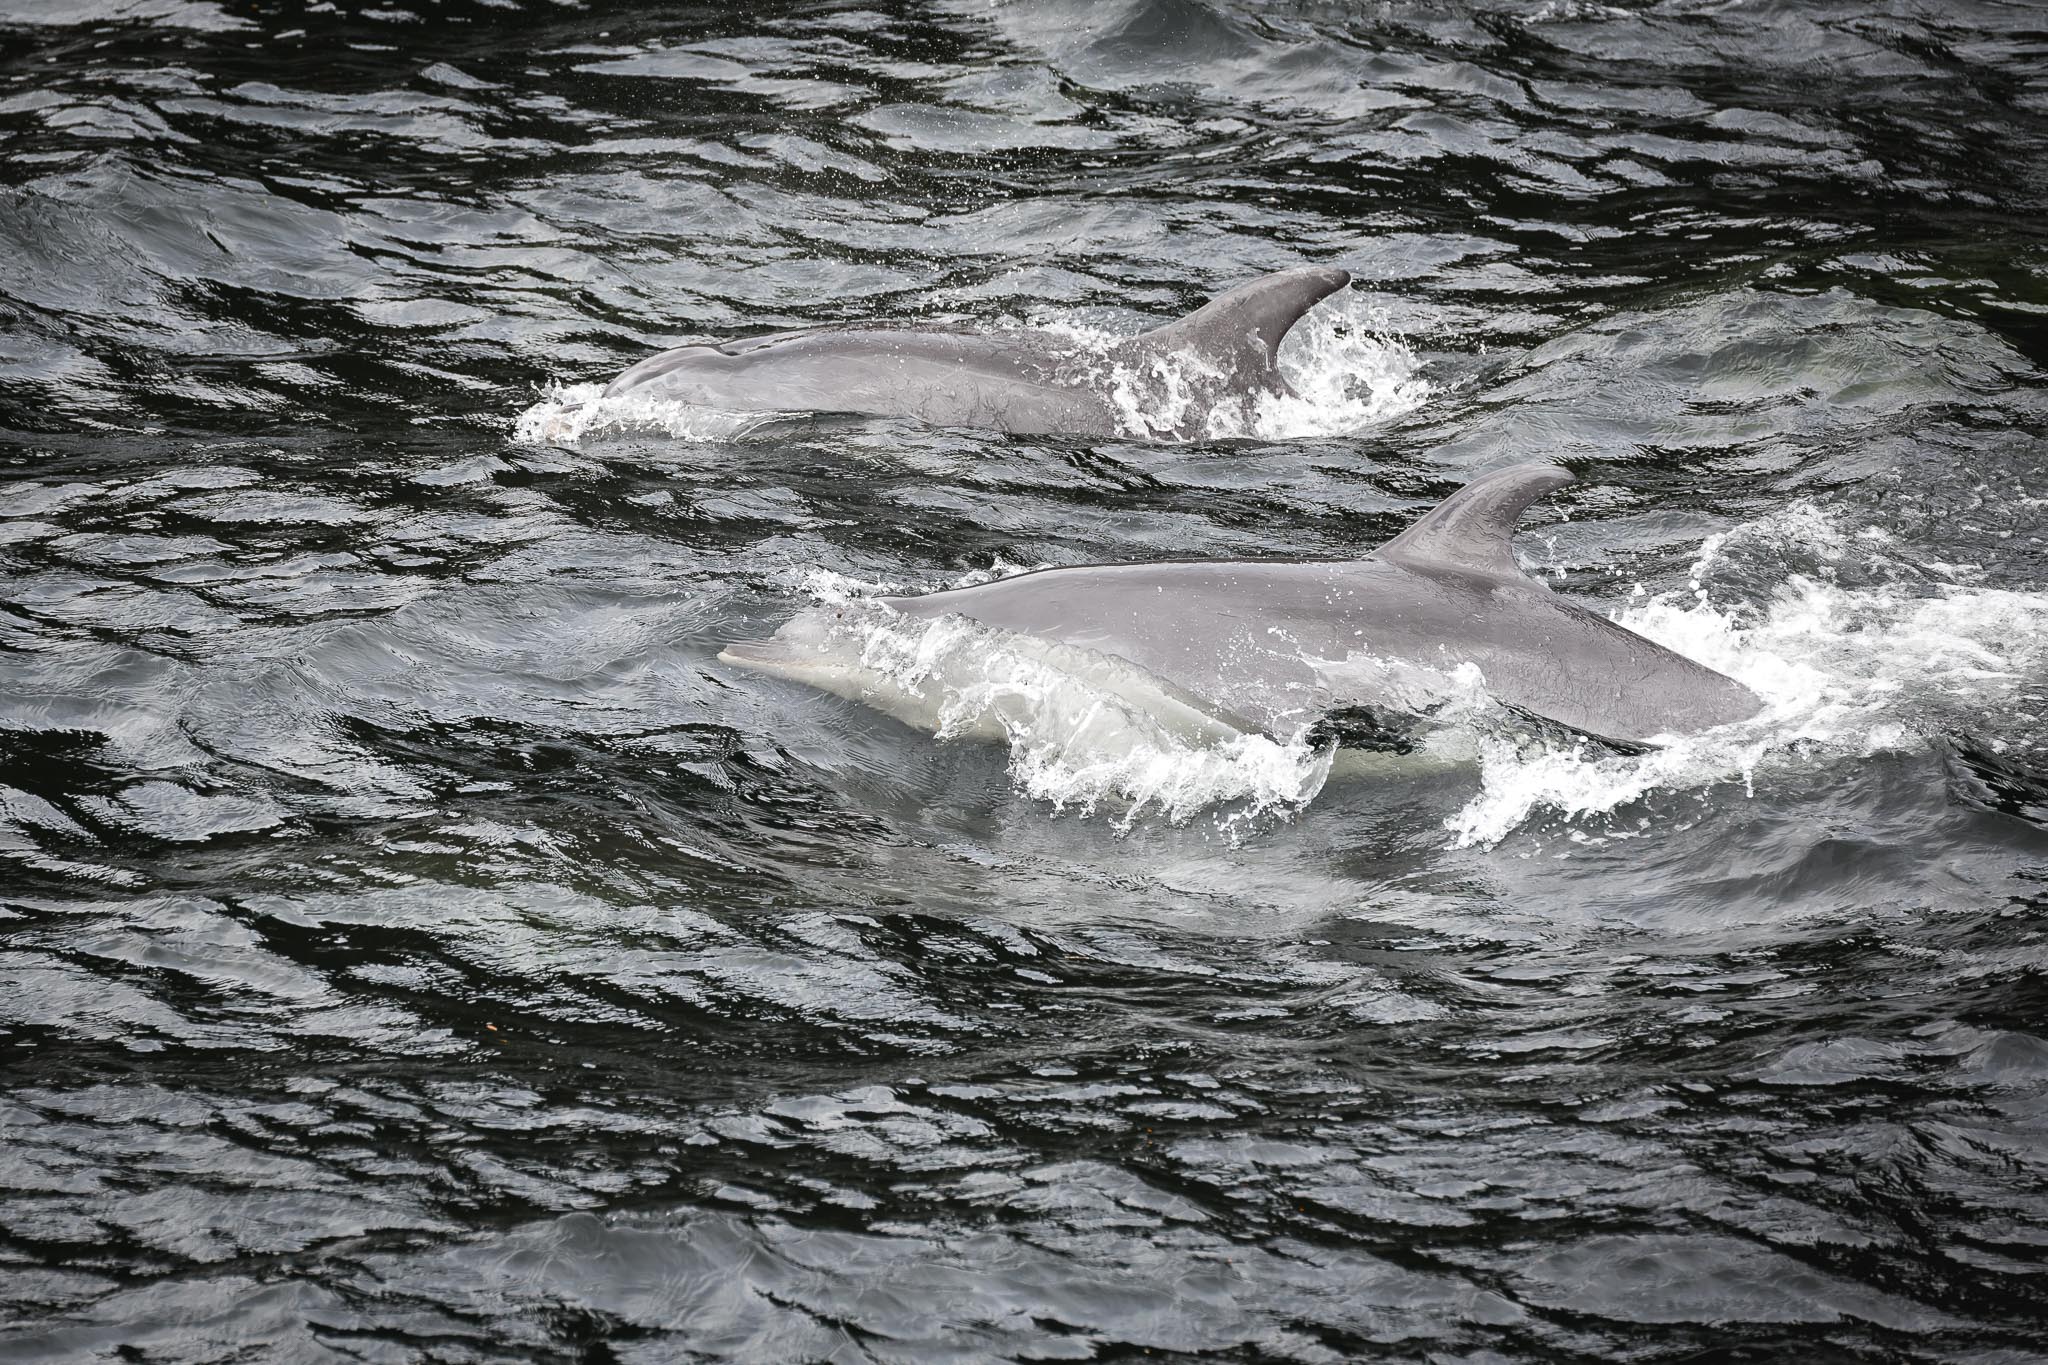 Dolphins playing in Doubtful Sound